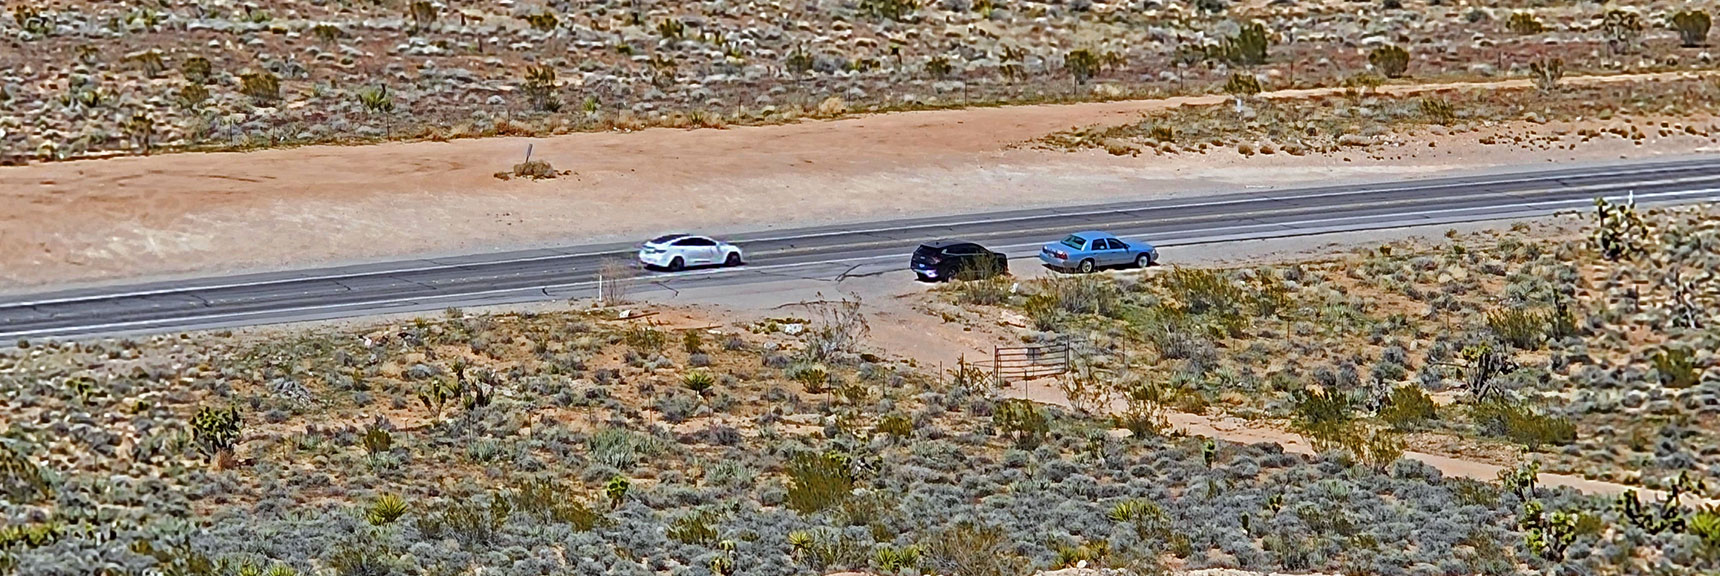 2 Car Strategy: Park One Car Here; Other Car at Wheeler Spring Camp, South End of Ridgeline. | Western High Ridge | Blue Diamond Hill, Nevada